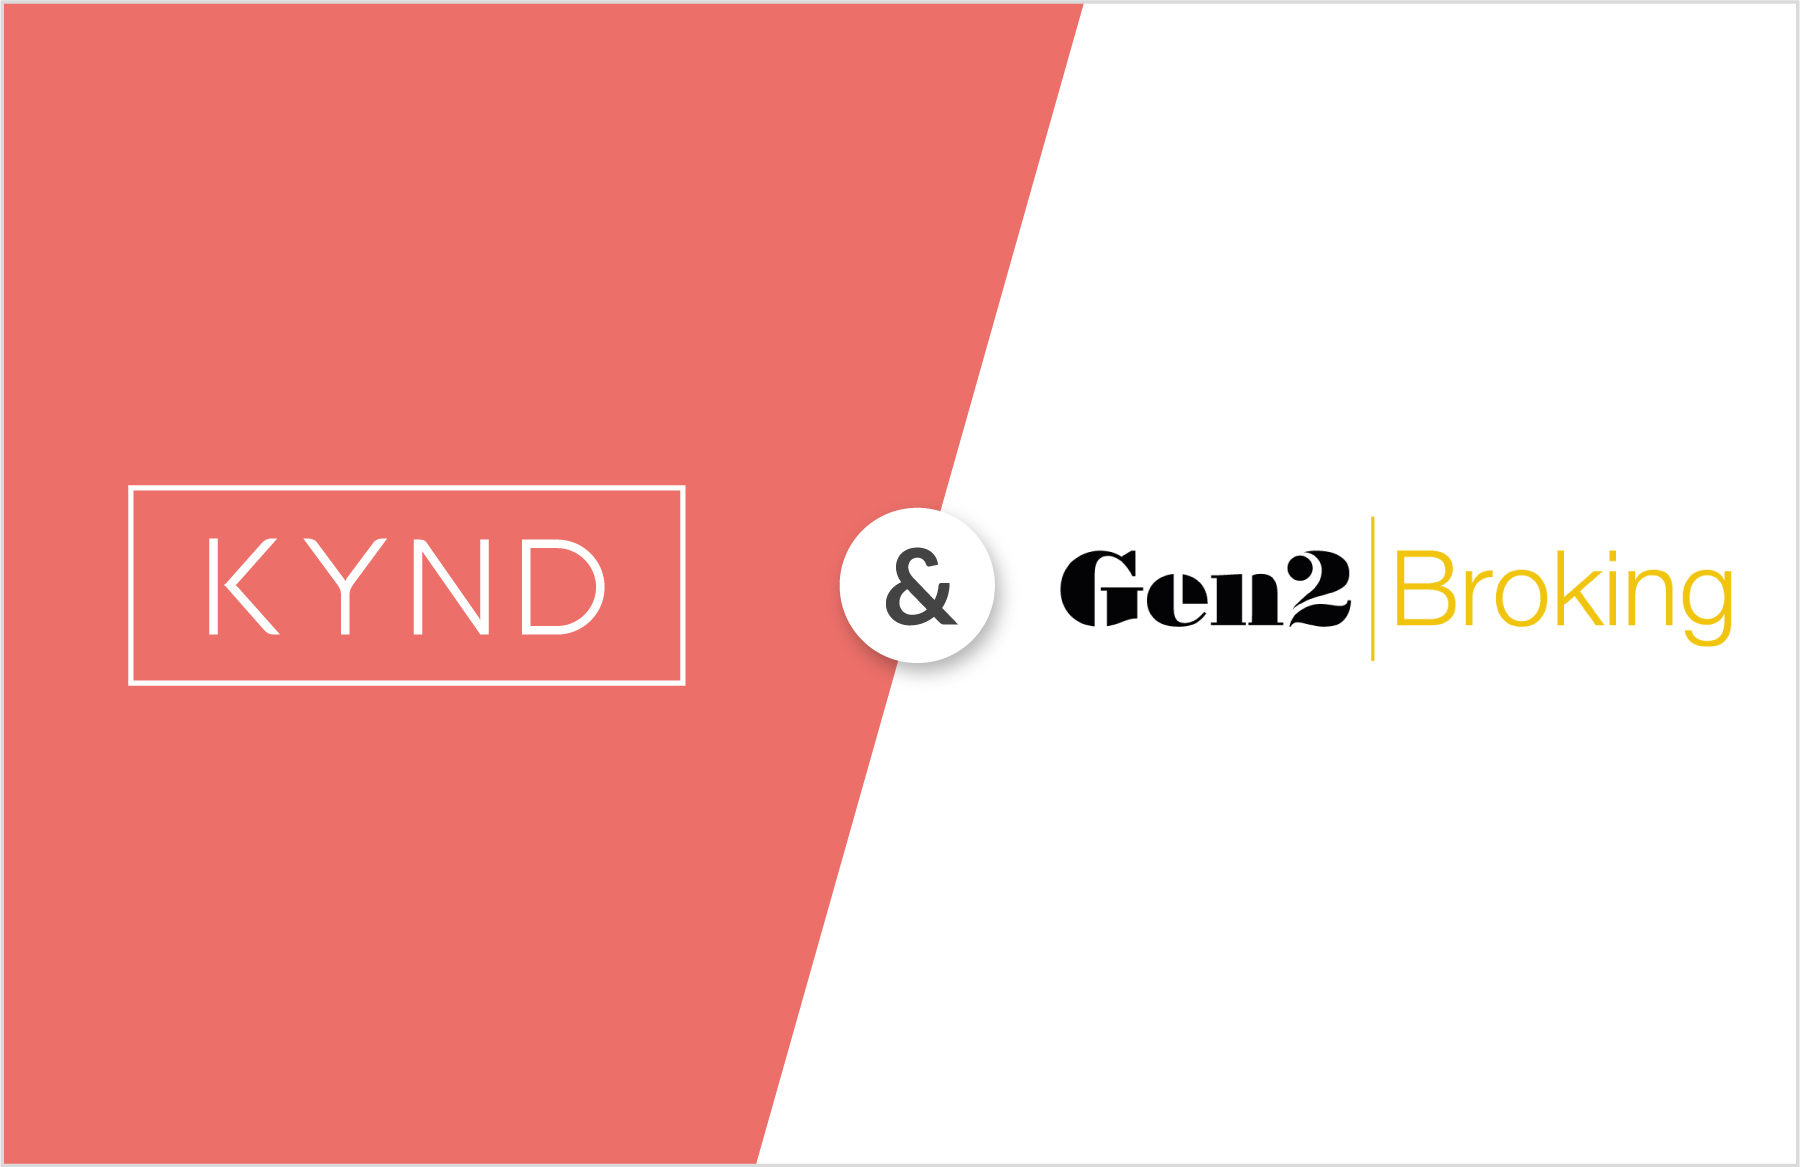 Gen2 Broking to join KYND’s Broker Programme to help businesses take control of cyber risk